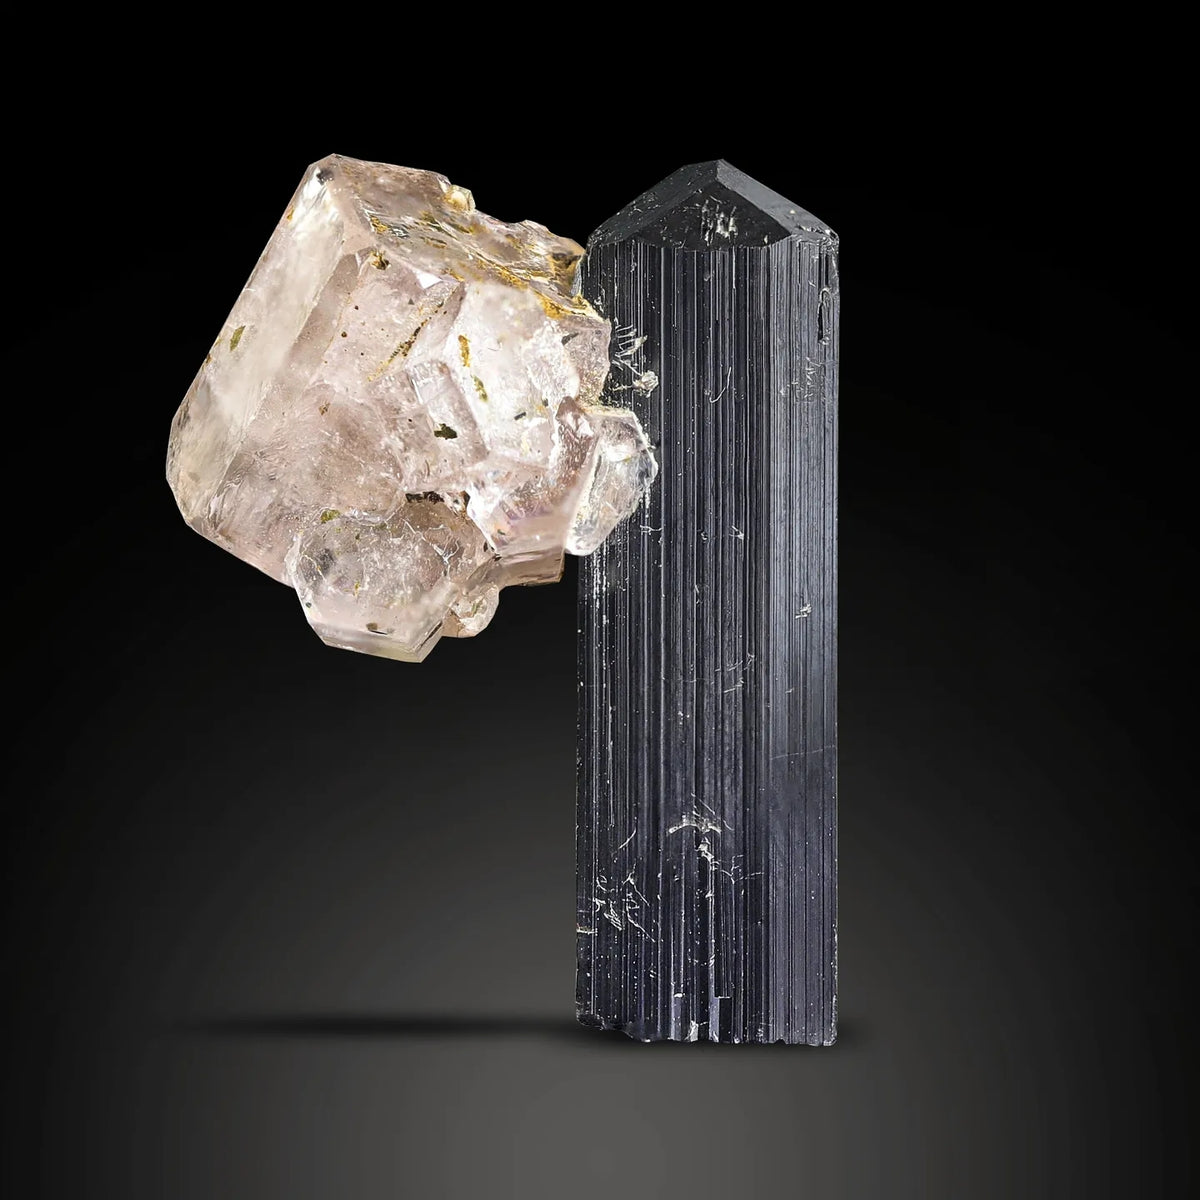 Gorgeous Pink Apatite Crystal Perched on Schorl Black Tourmaline from Pakistan